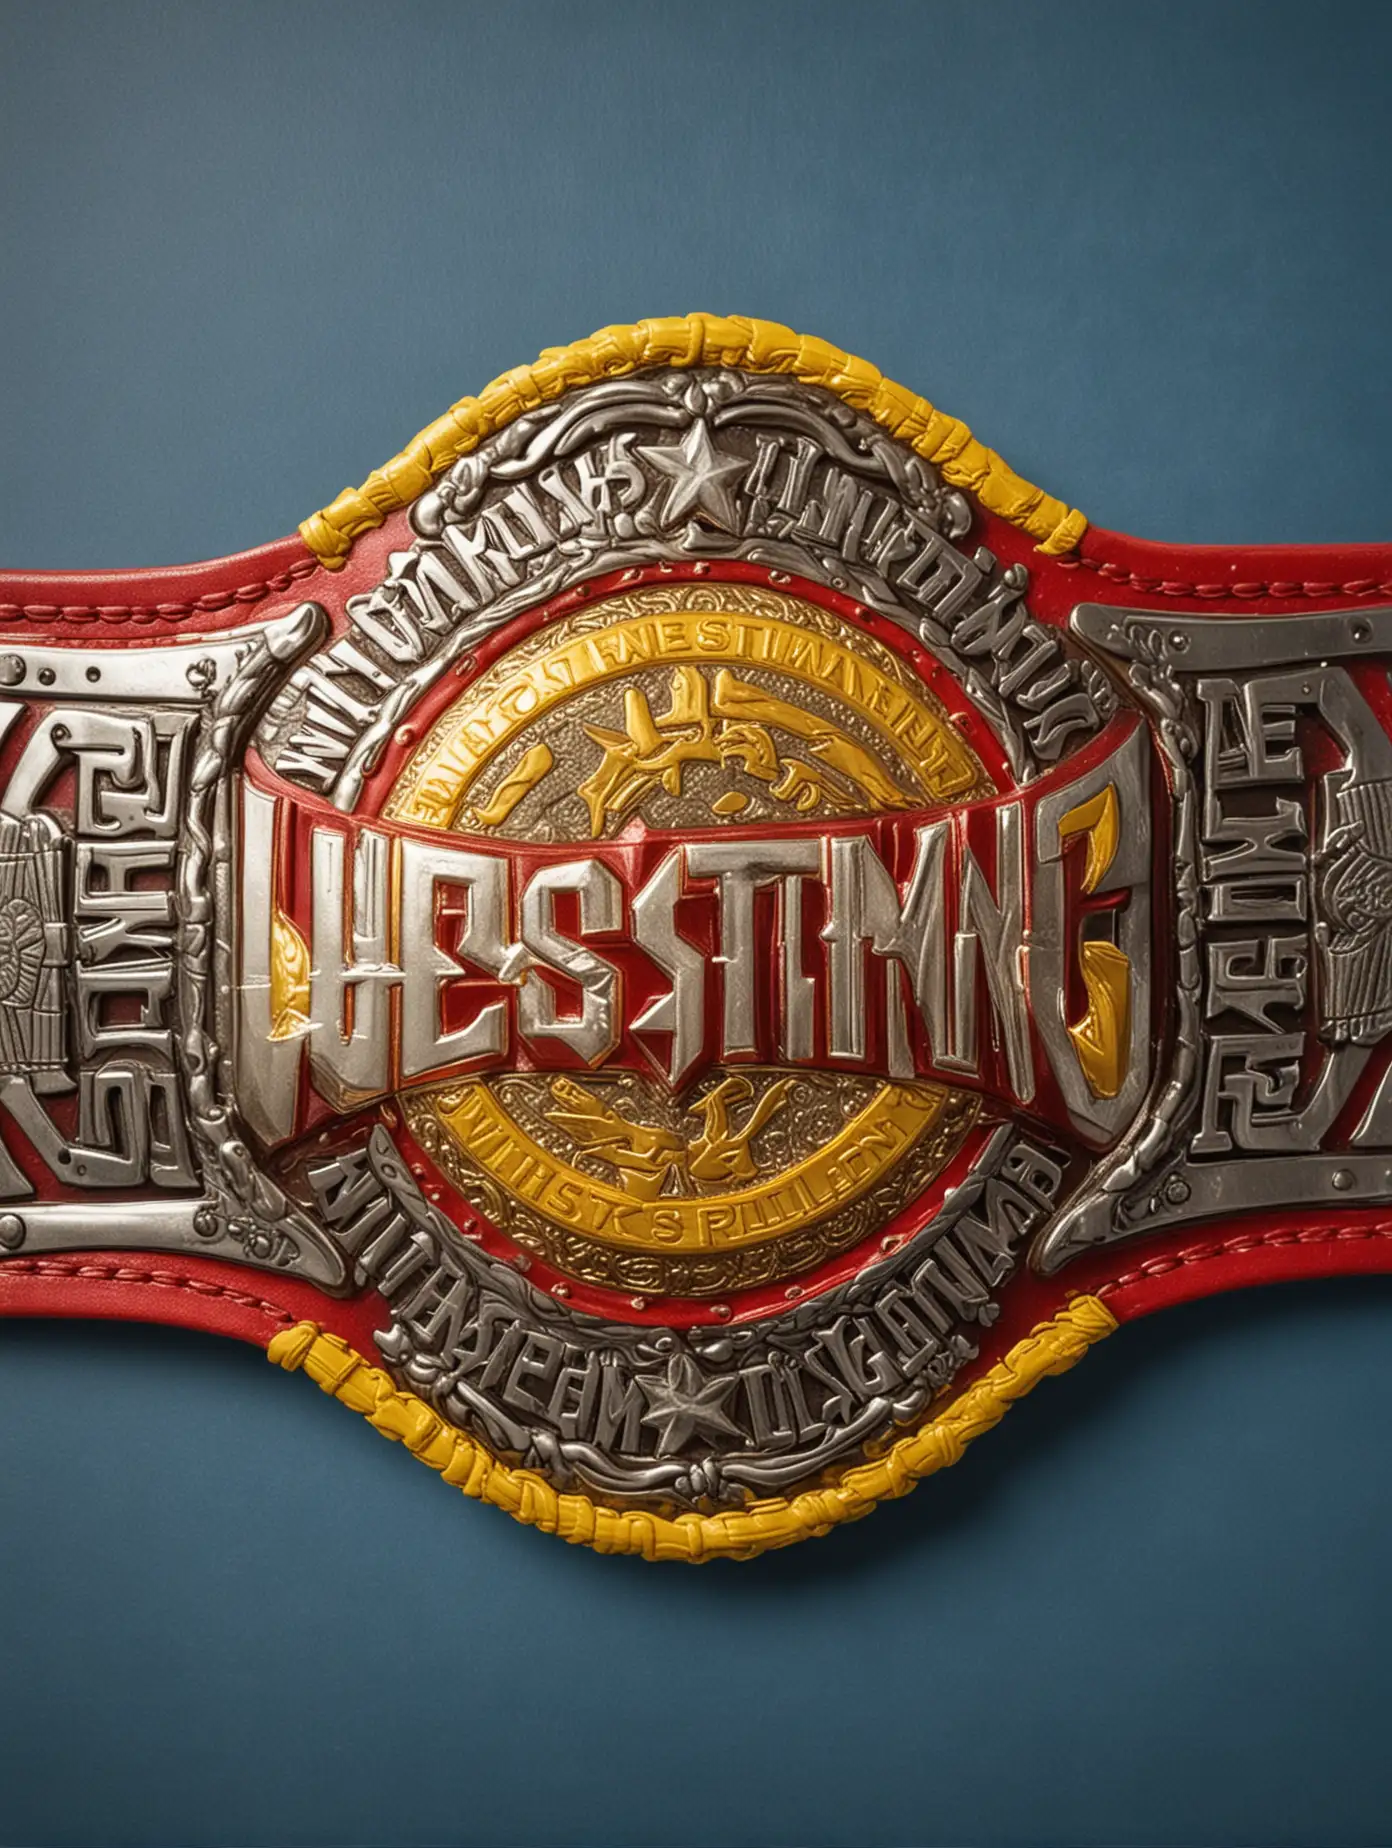 Vibrant Red and Yellow Wrestling Champion Belt on Blue Background